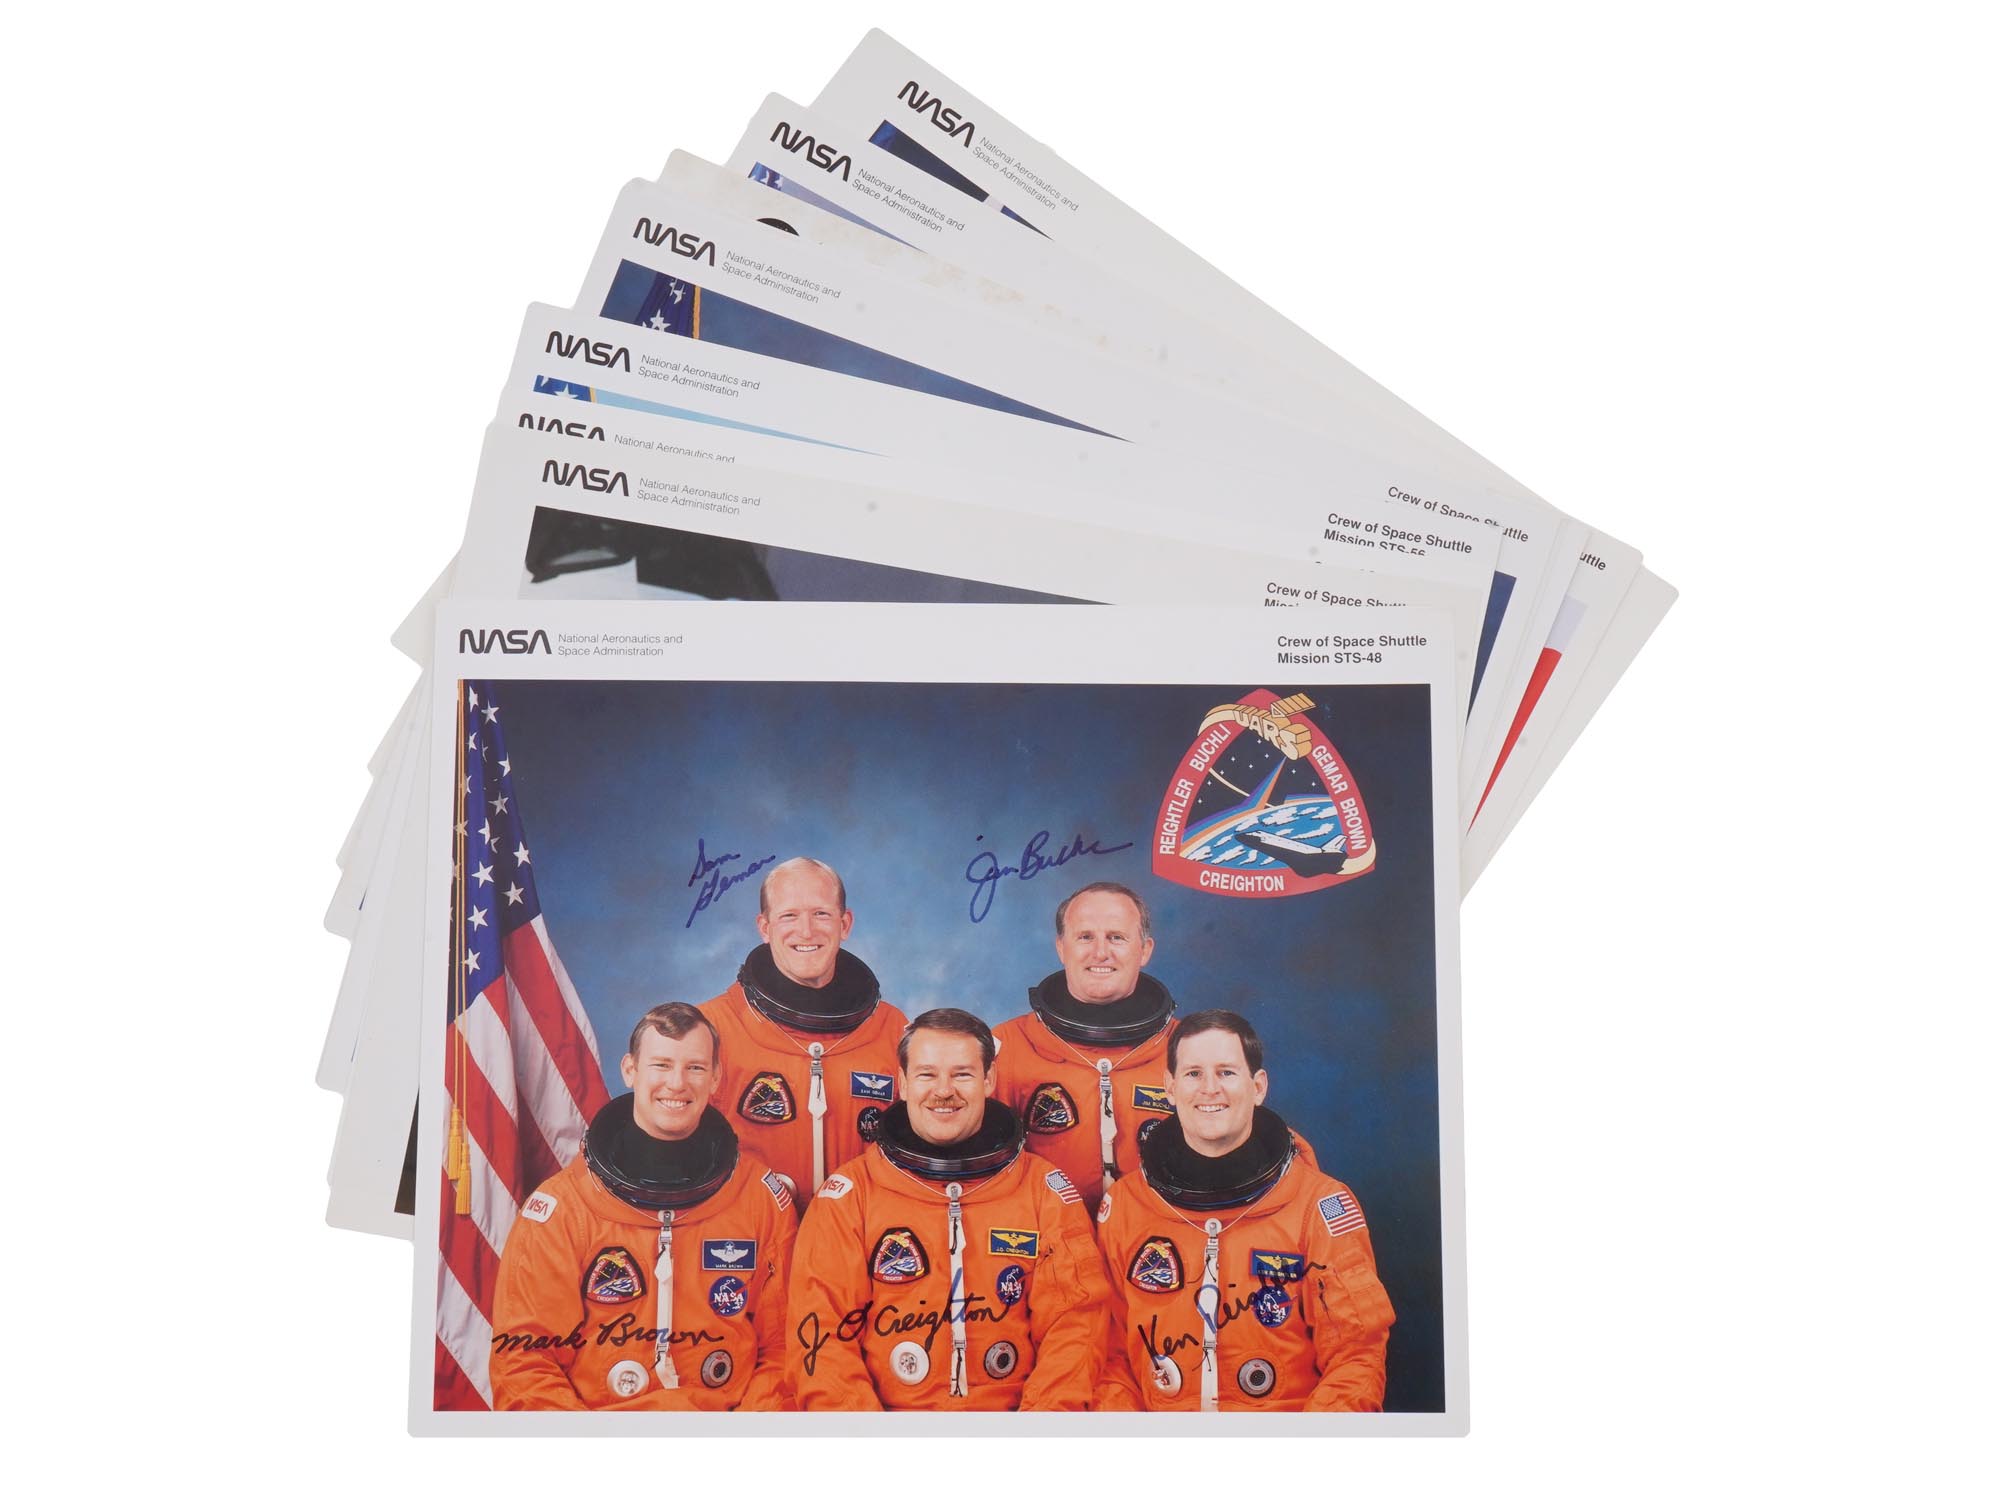 LOT 15 NASA PHOTOS AUTOGRAPHED BY SHUTTLES CREWS PIC-0